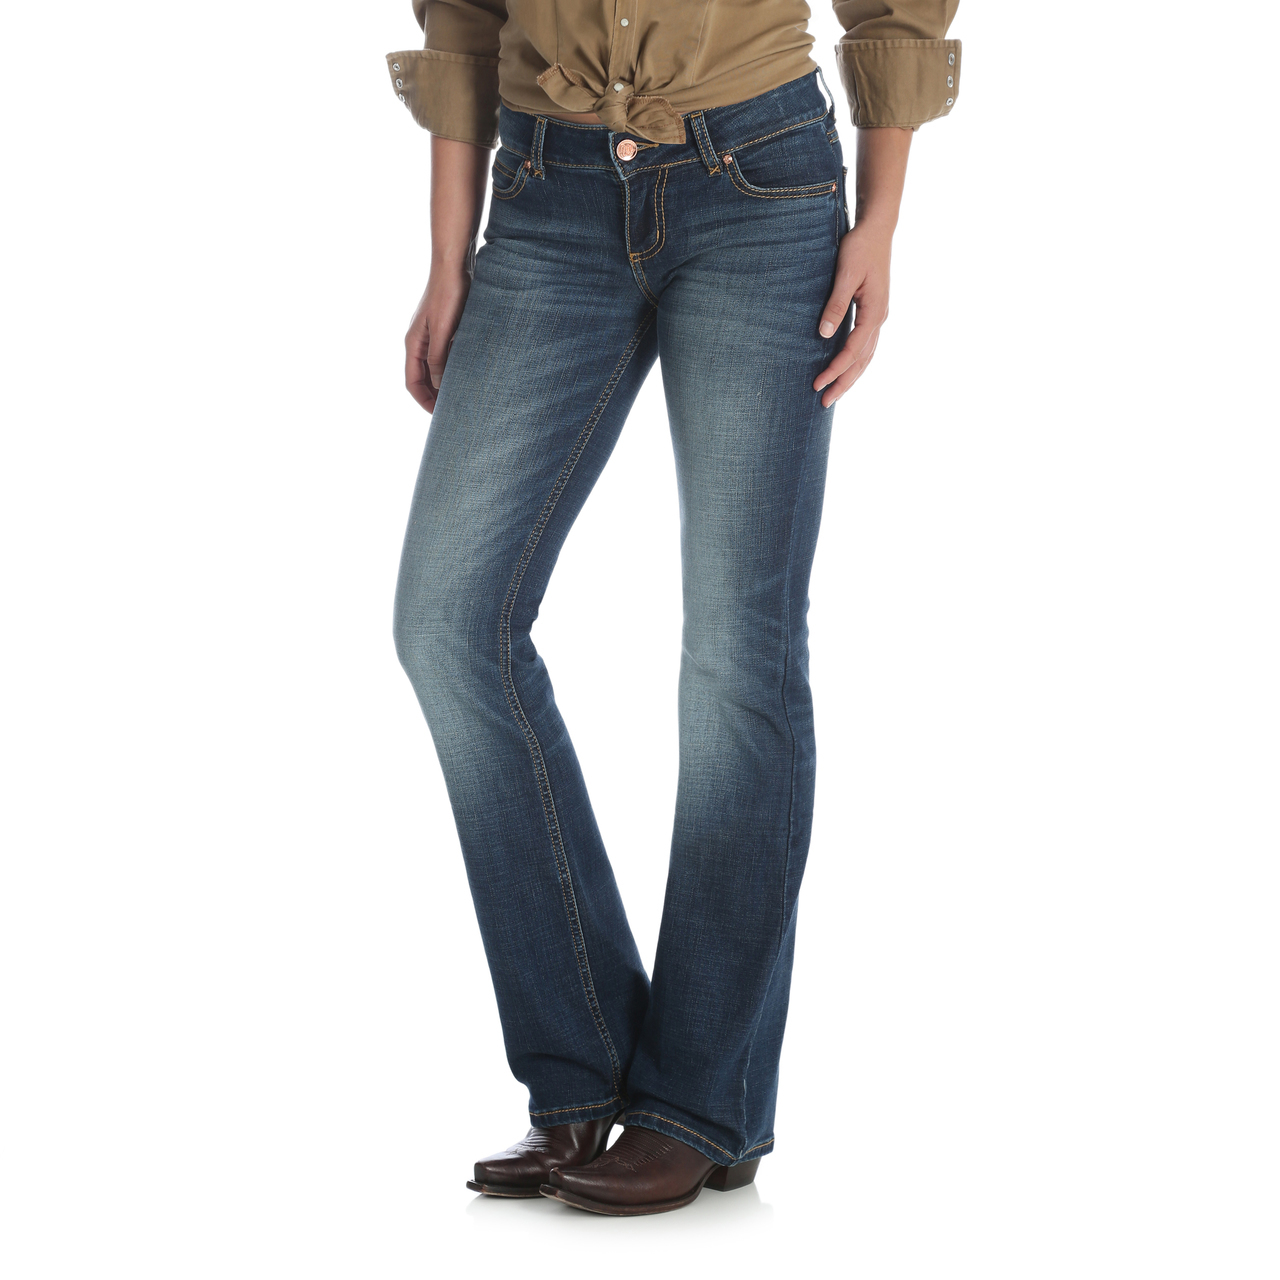 Blue denim jeans - click or tap to browse women's apparel at Coastal